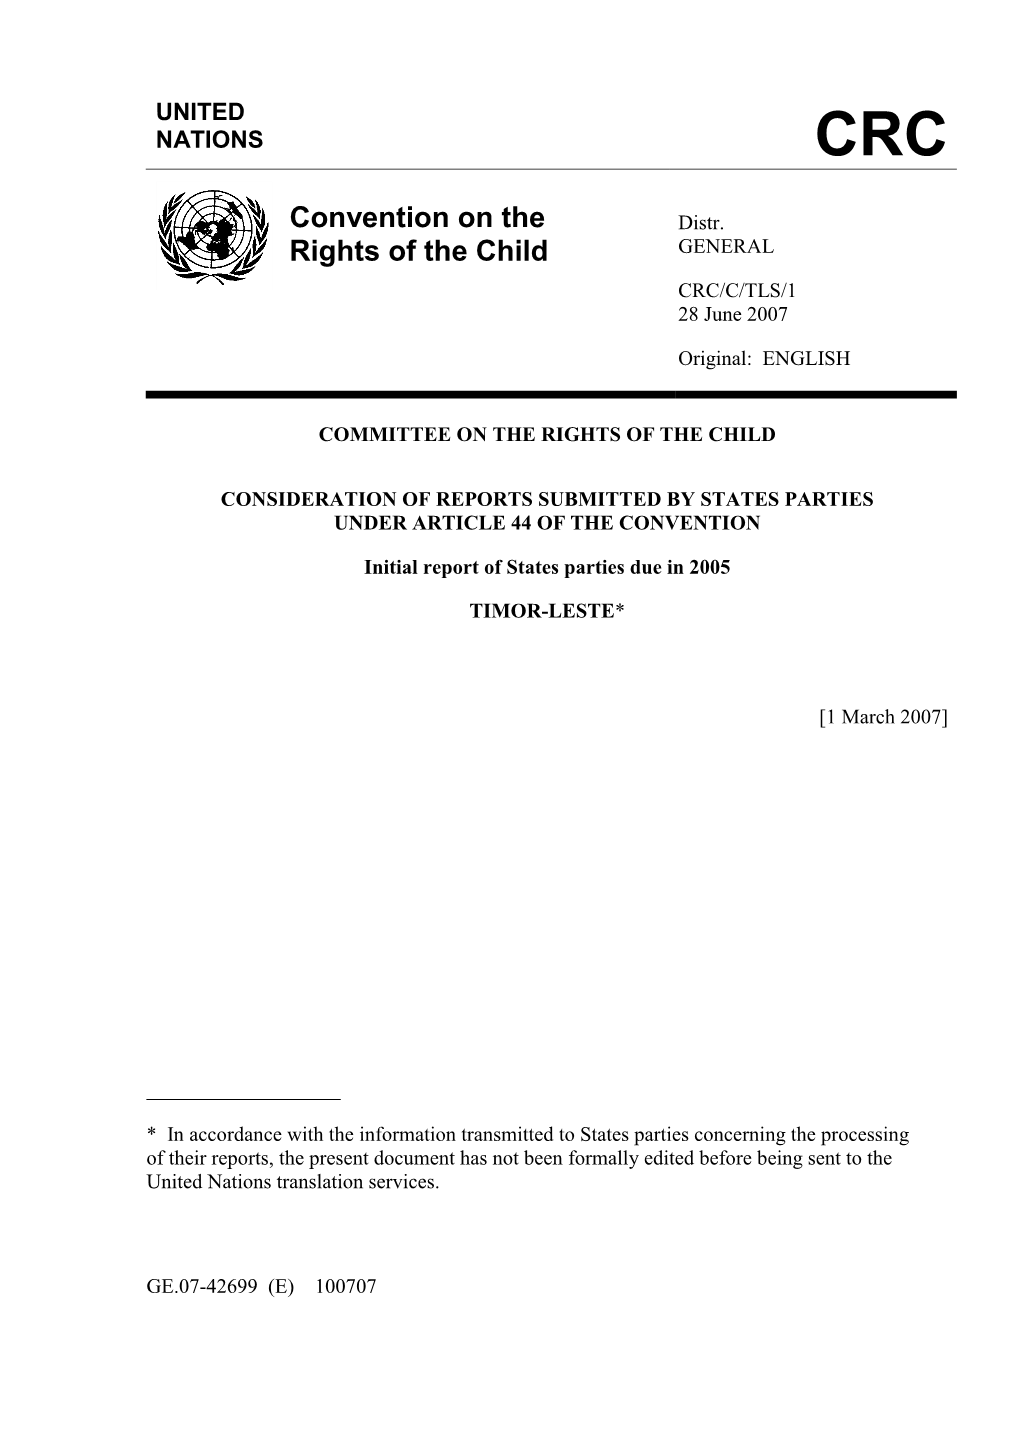 Convention on the Rights of the Child Is Not Only a Legal Document Which We Must Comply With